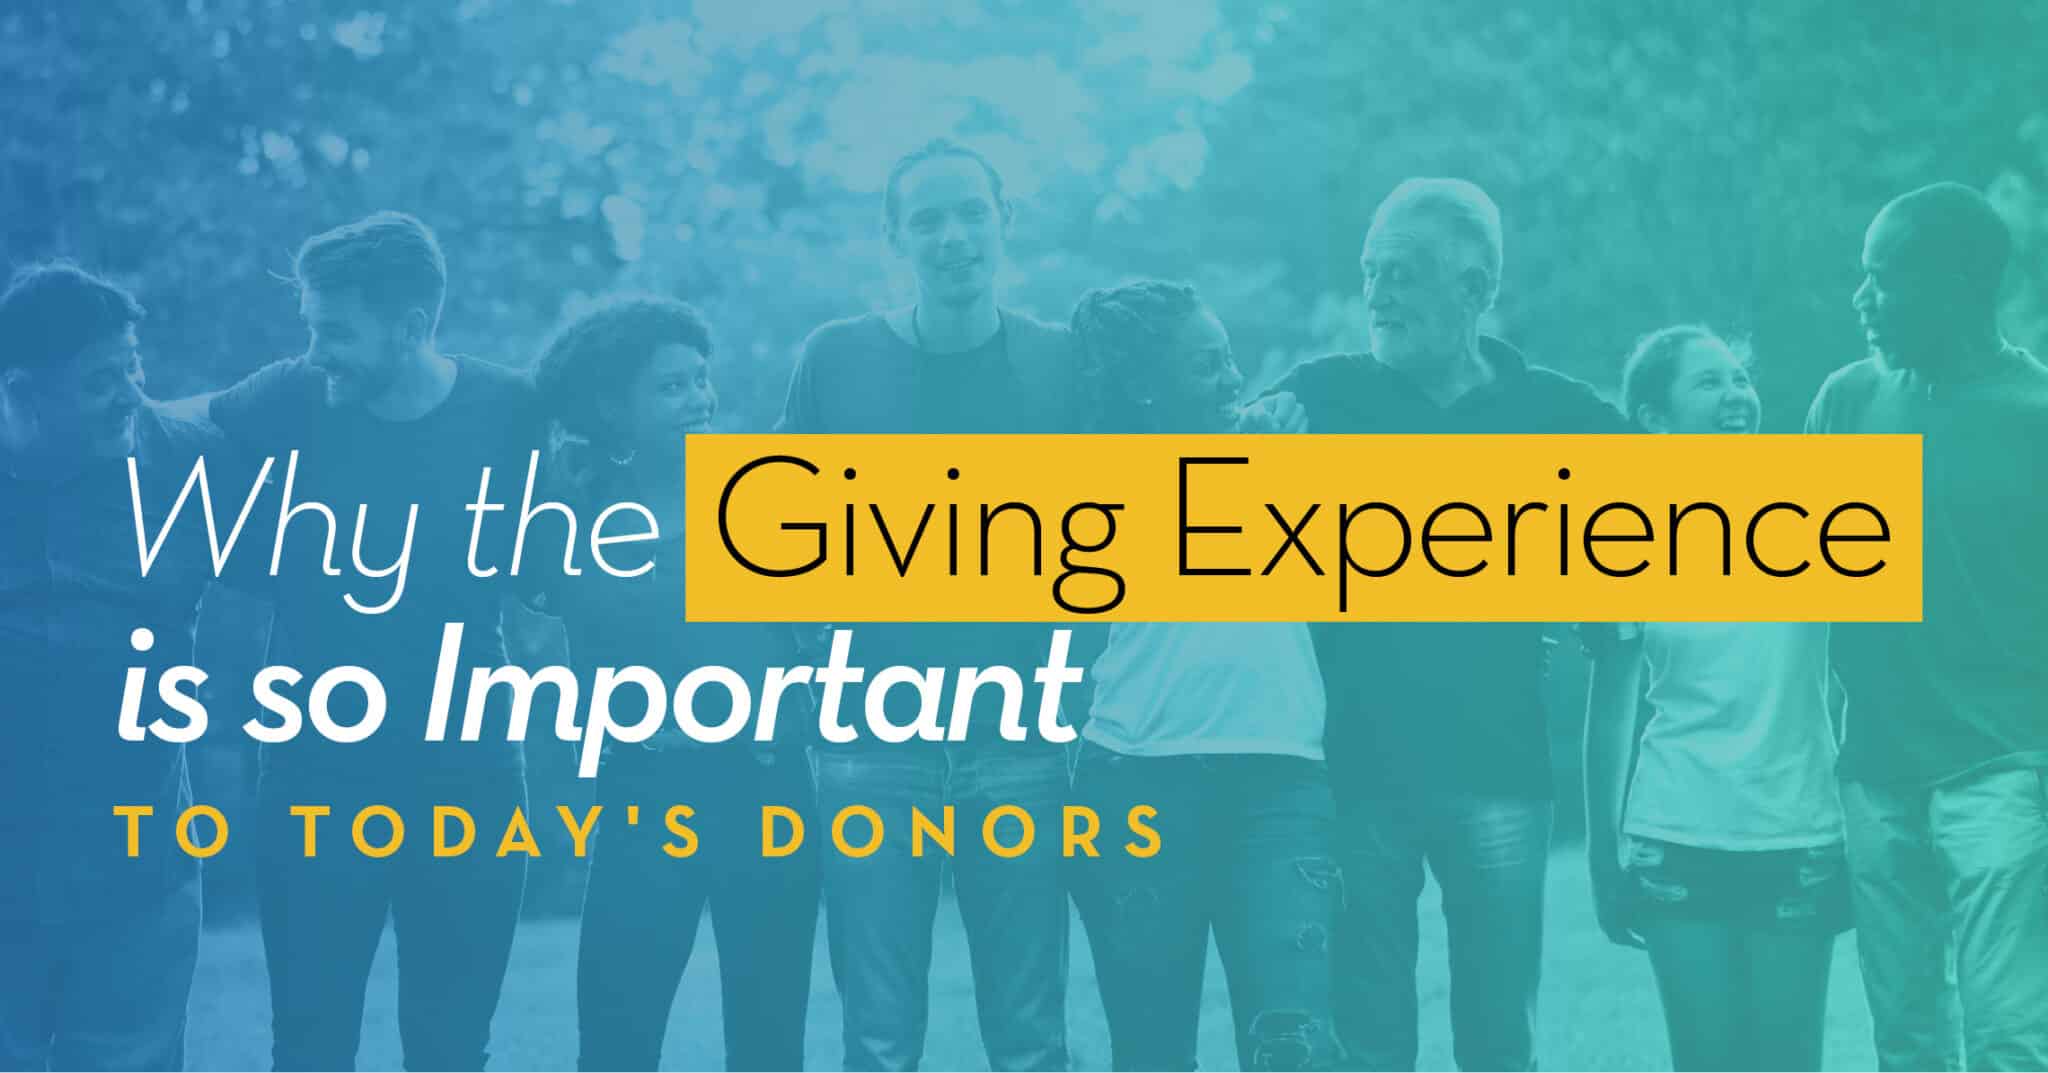 Why the Giving Experience is so Important.